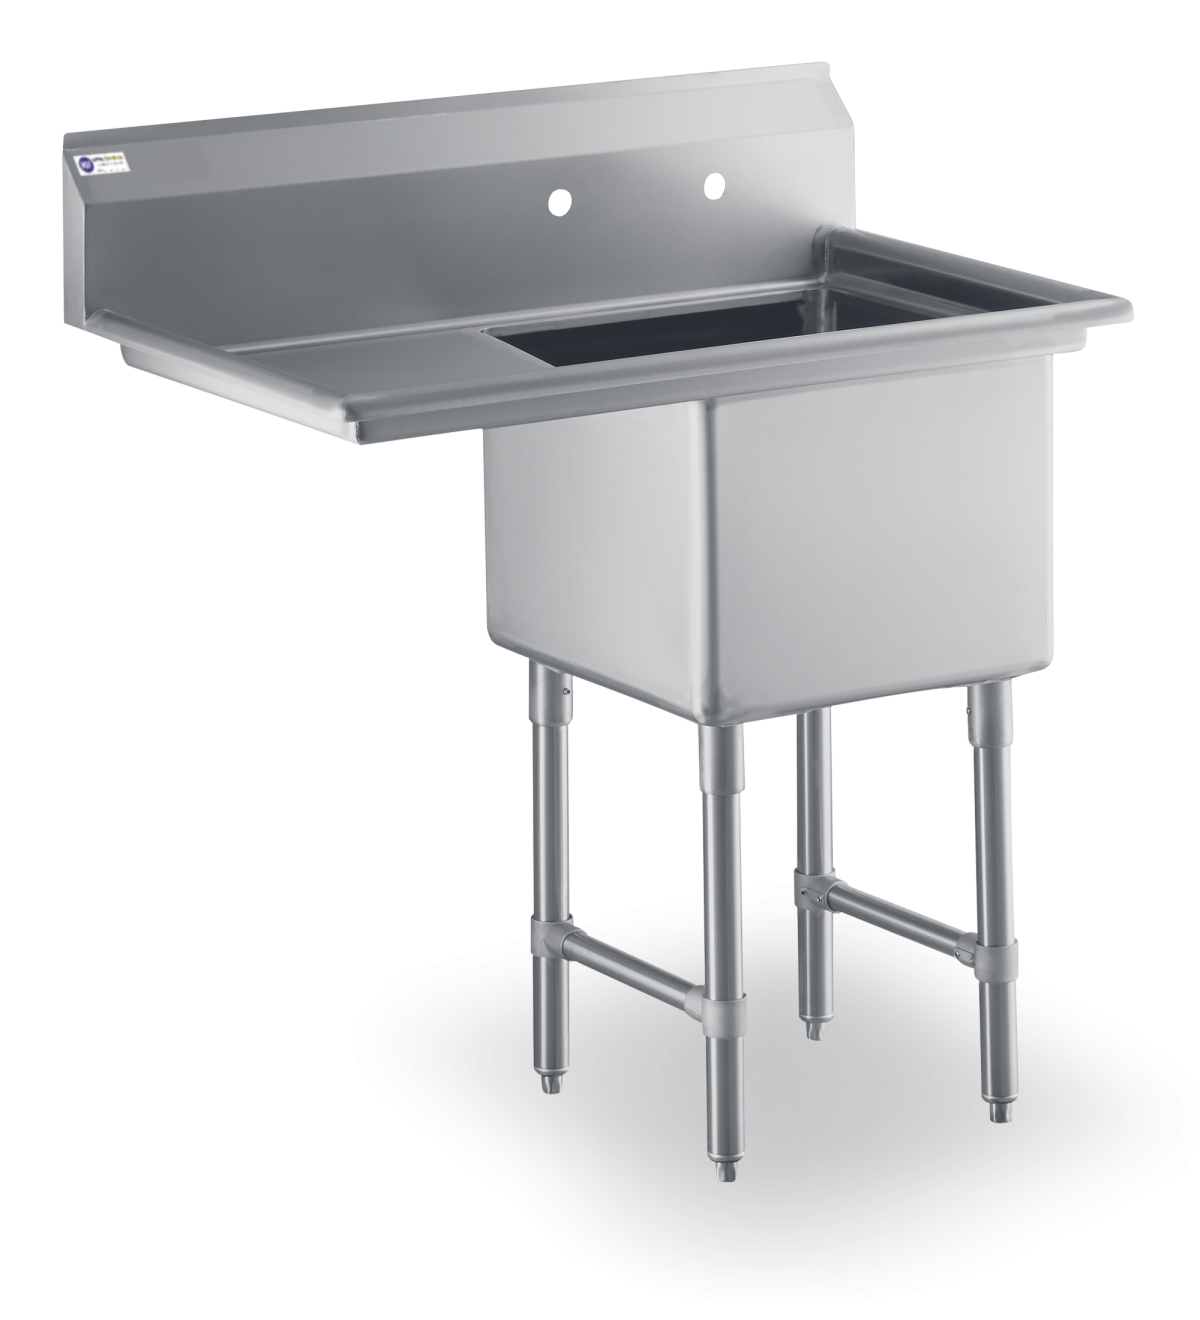 18 Gauge Stainless Steel Sink with One 18" Drainboard On Left